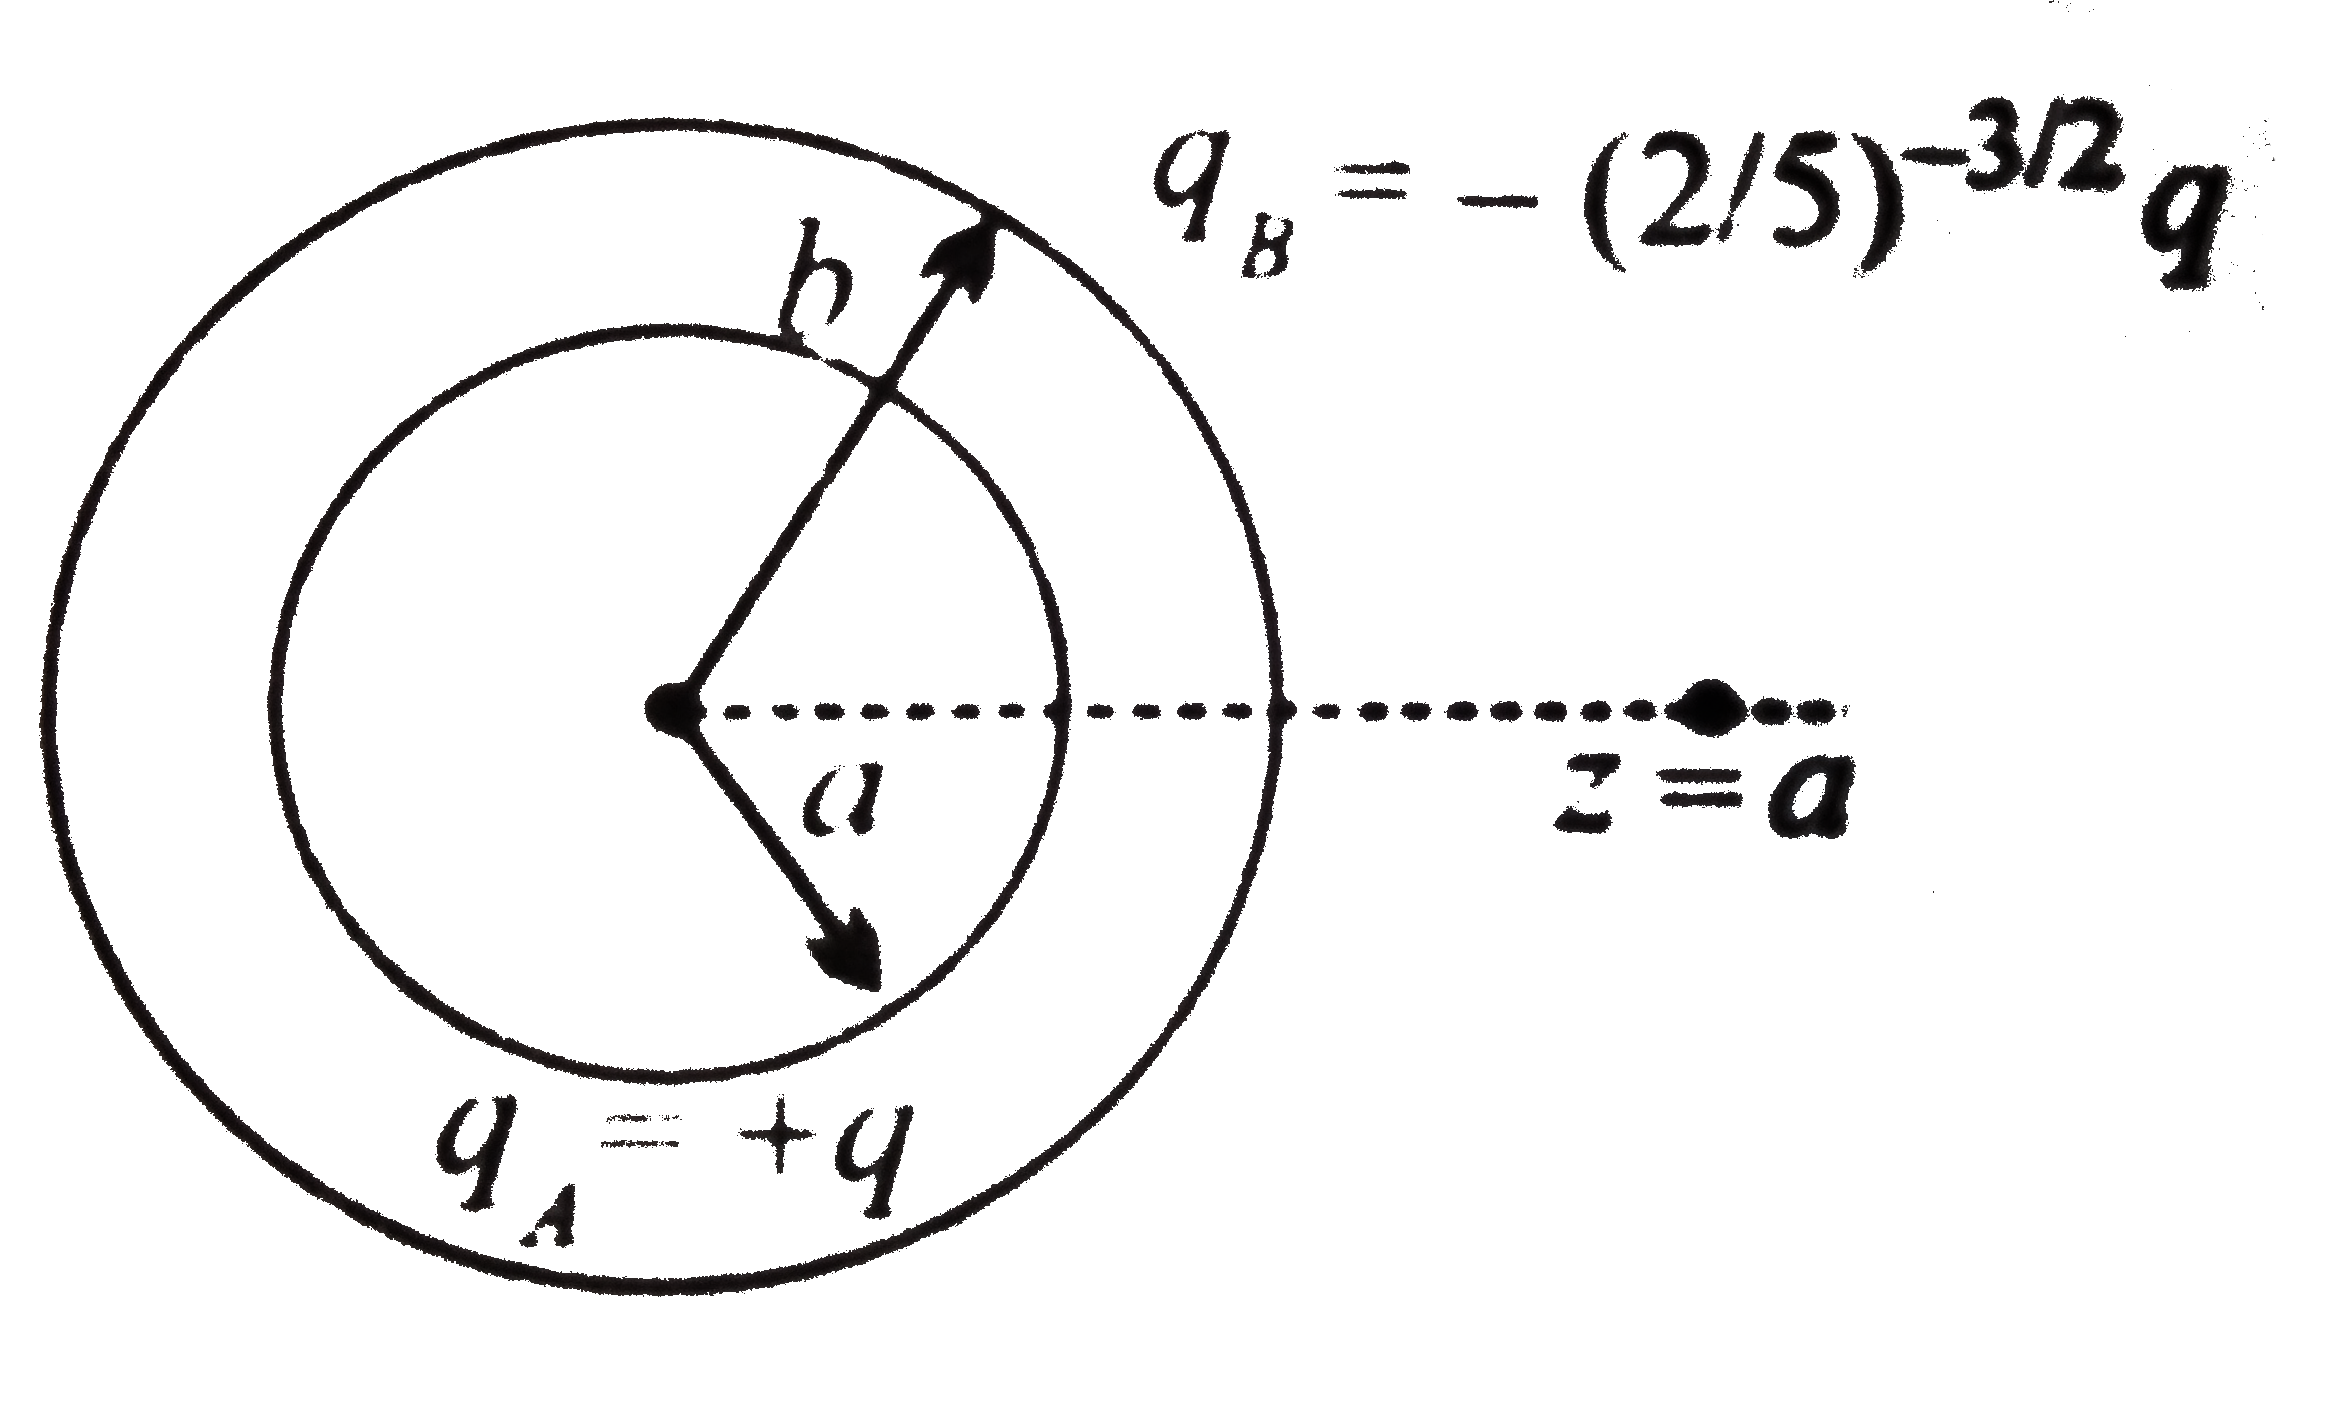 Two concentric rings, one of radius a and the other of radius b, have the charges +q, and -(2//5)^(-3//2)q, respectively as shown in fig.      Find the rario b//a if a charge particle palaced on the axis at z =a is i equilibrium.